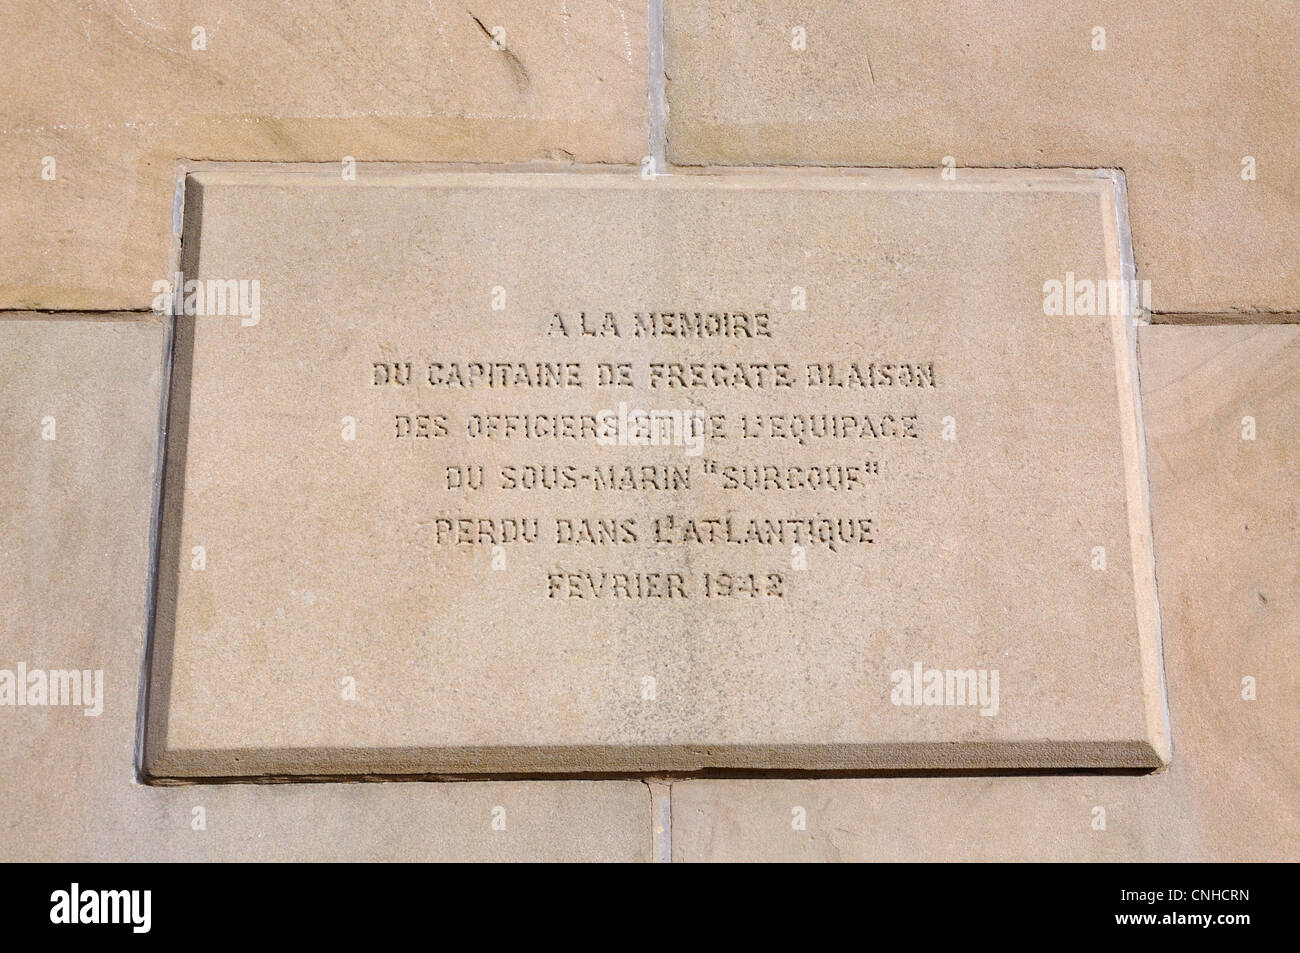 This engraved stone is part of the cross of Lorraine (my image CNHCNM) which is a monument dedicated to the Free French Navy in Greenock, Scotland, UK Stock Photo